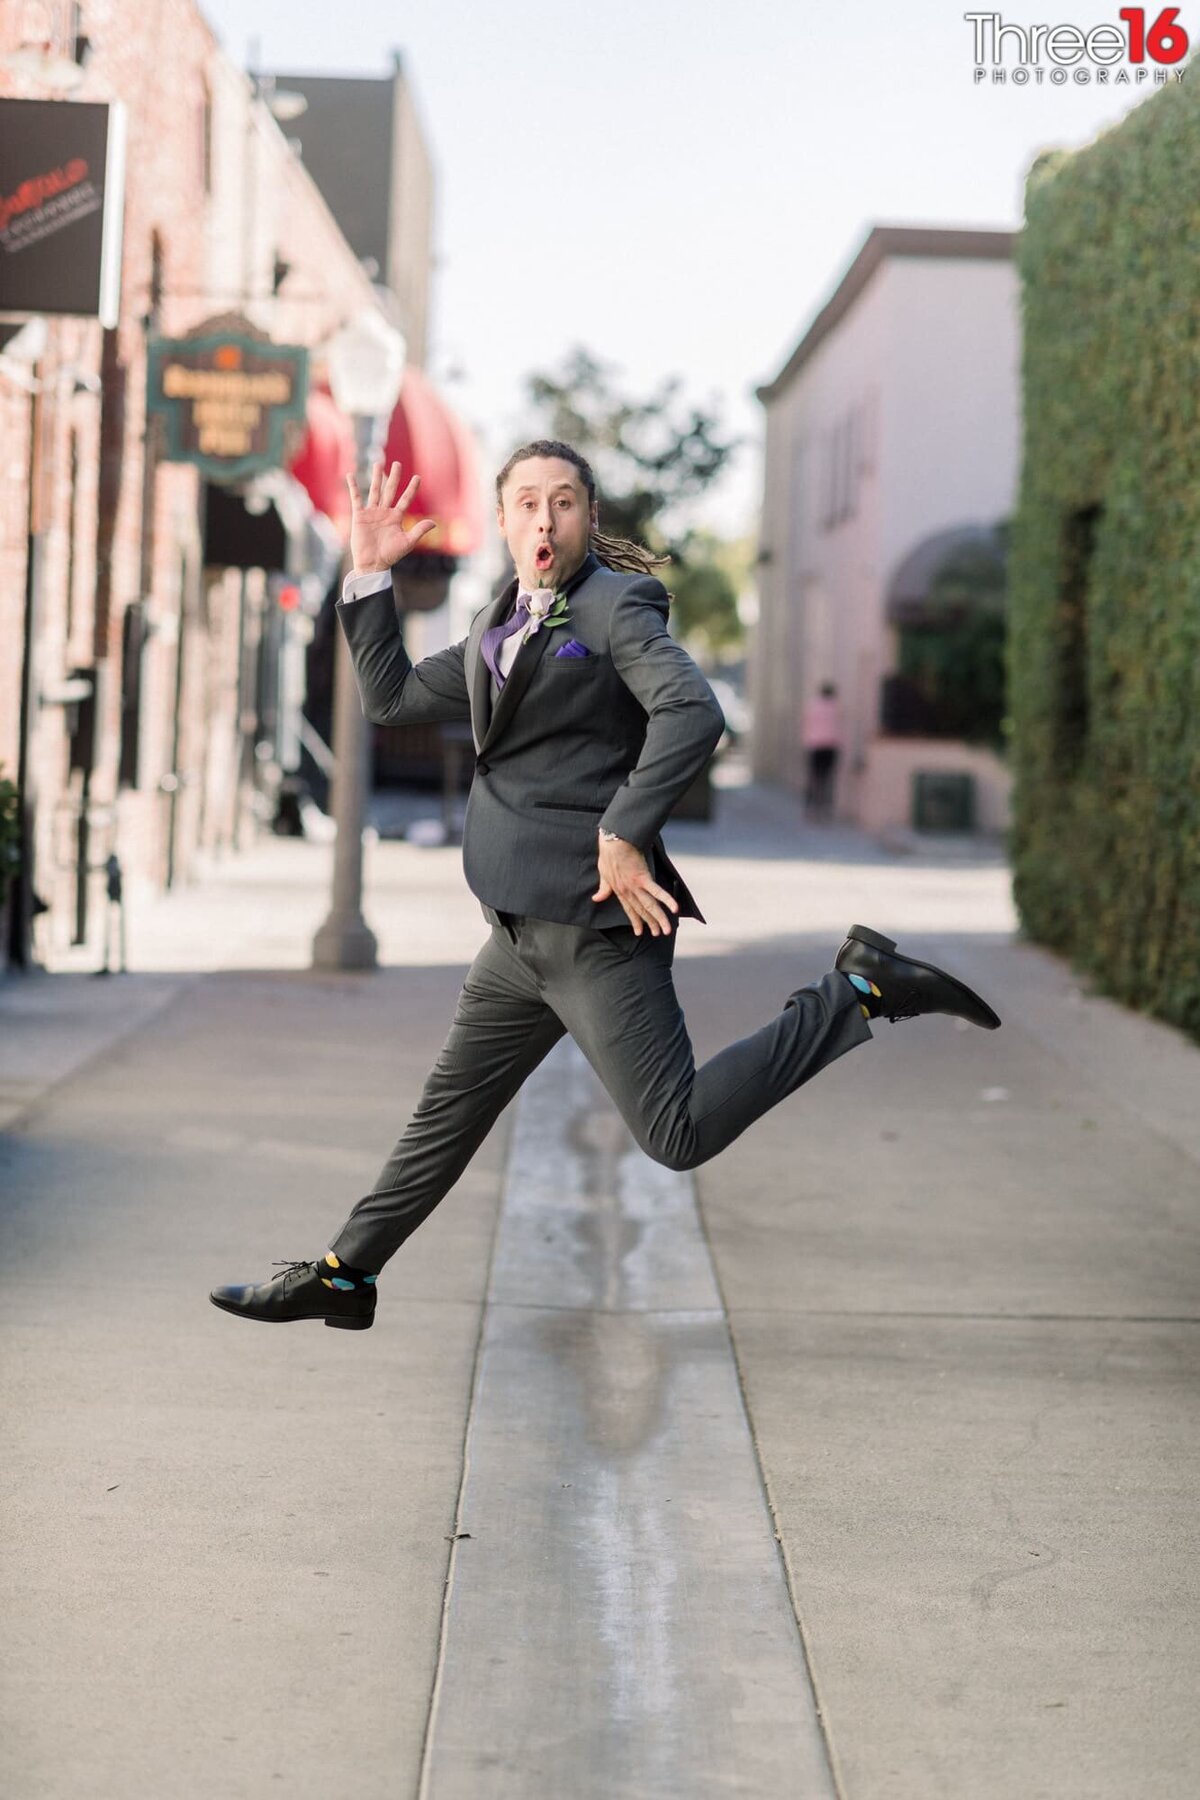 Groom acts goofy as he jumps in the air in mid-stride